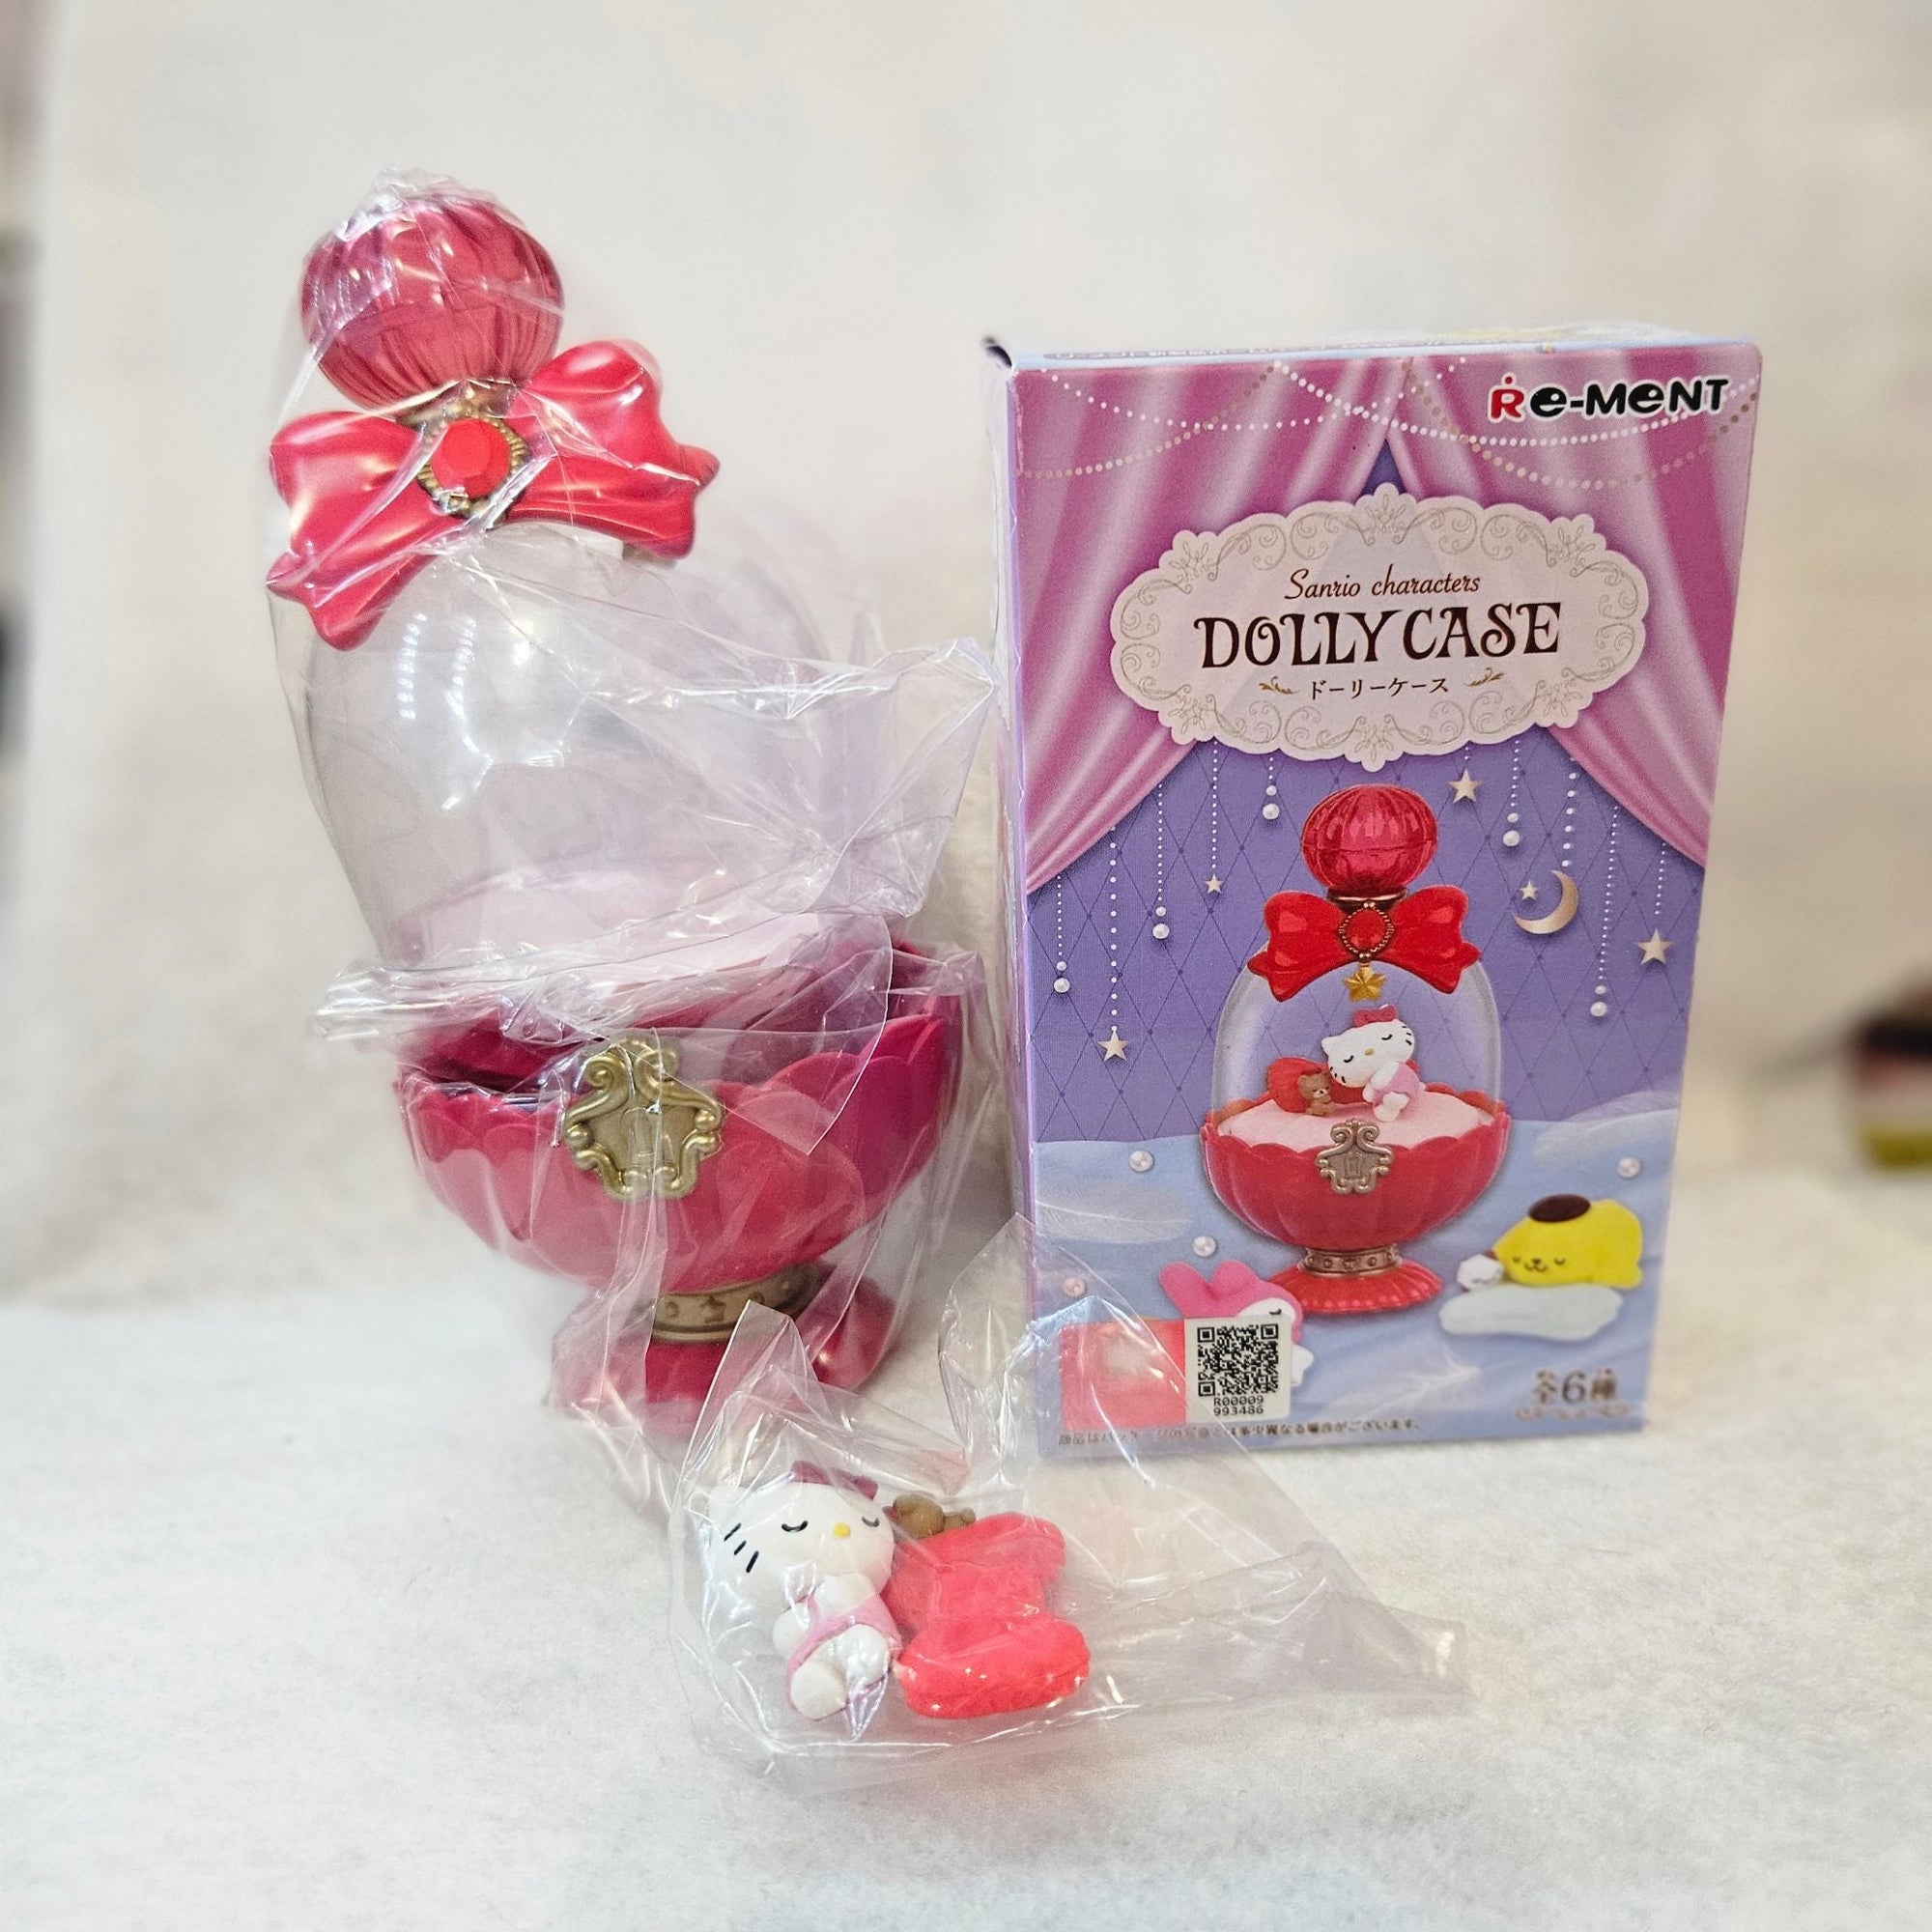 Hello Kitty - Sanrio Character Dolly Case Series Blind Box by Re-ment - 1